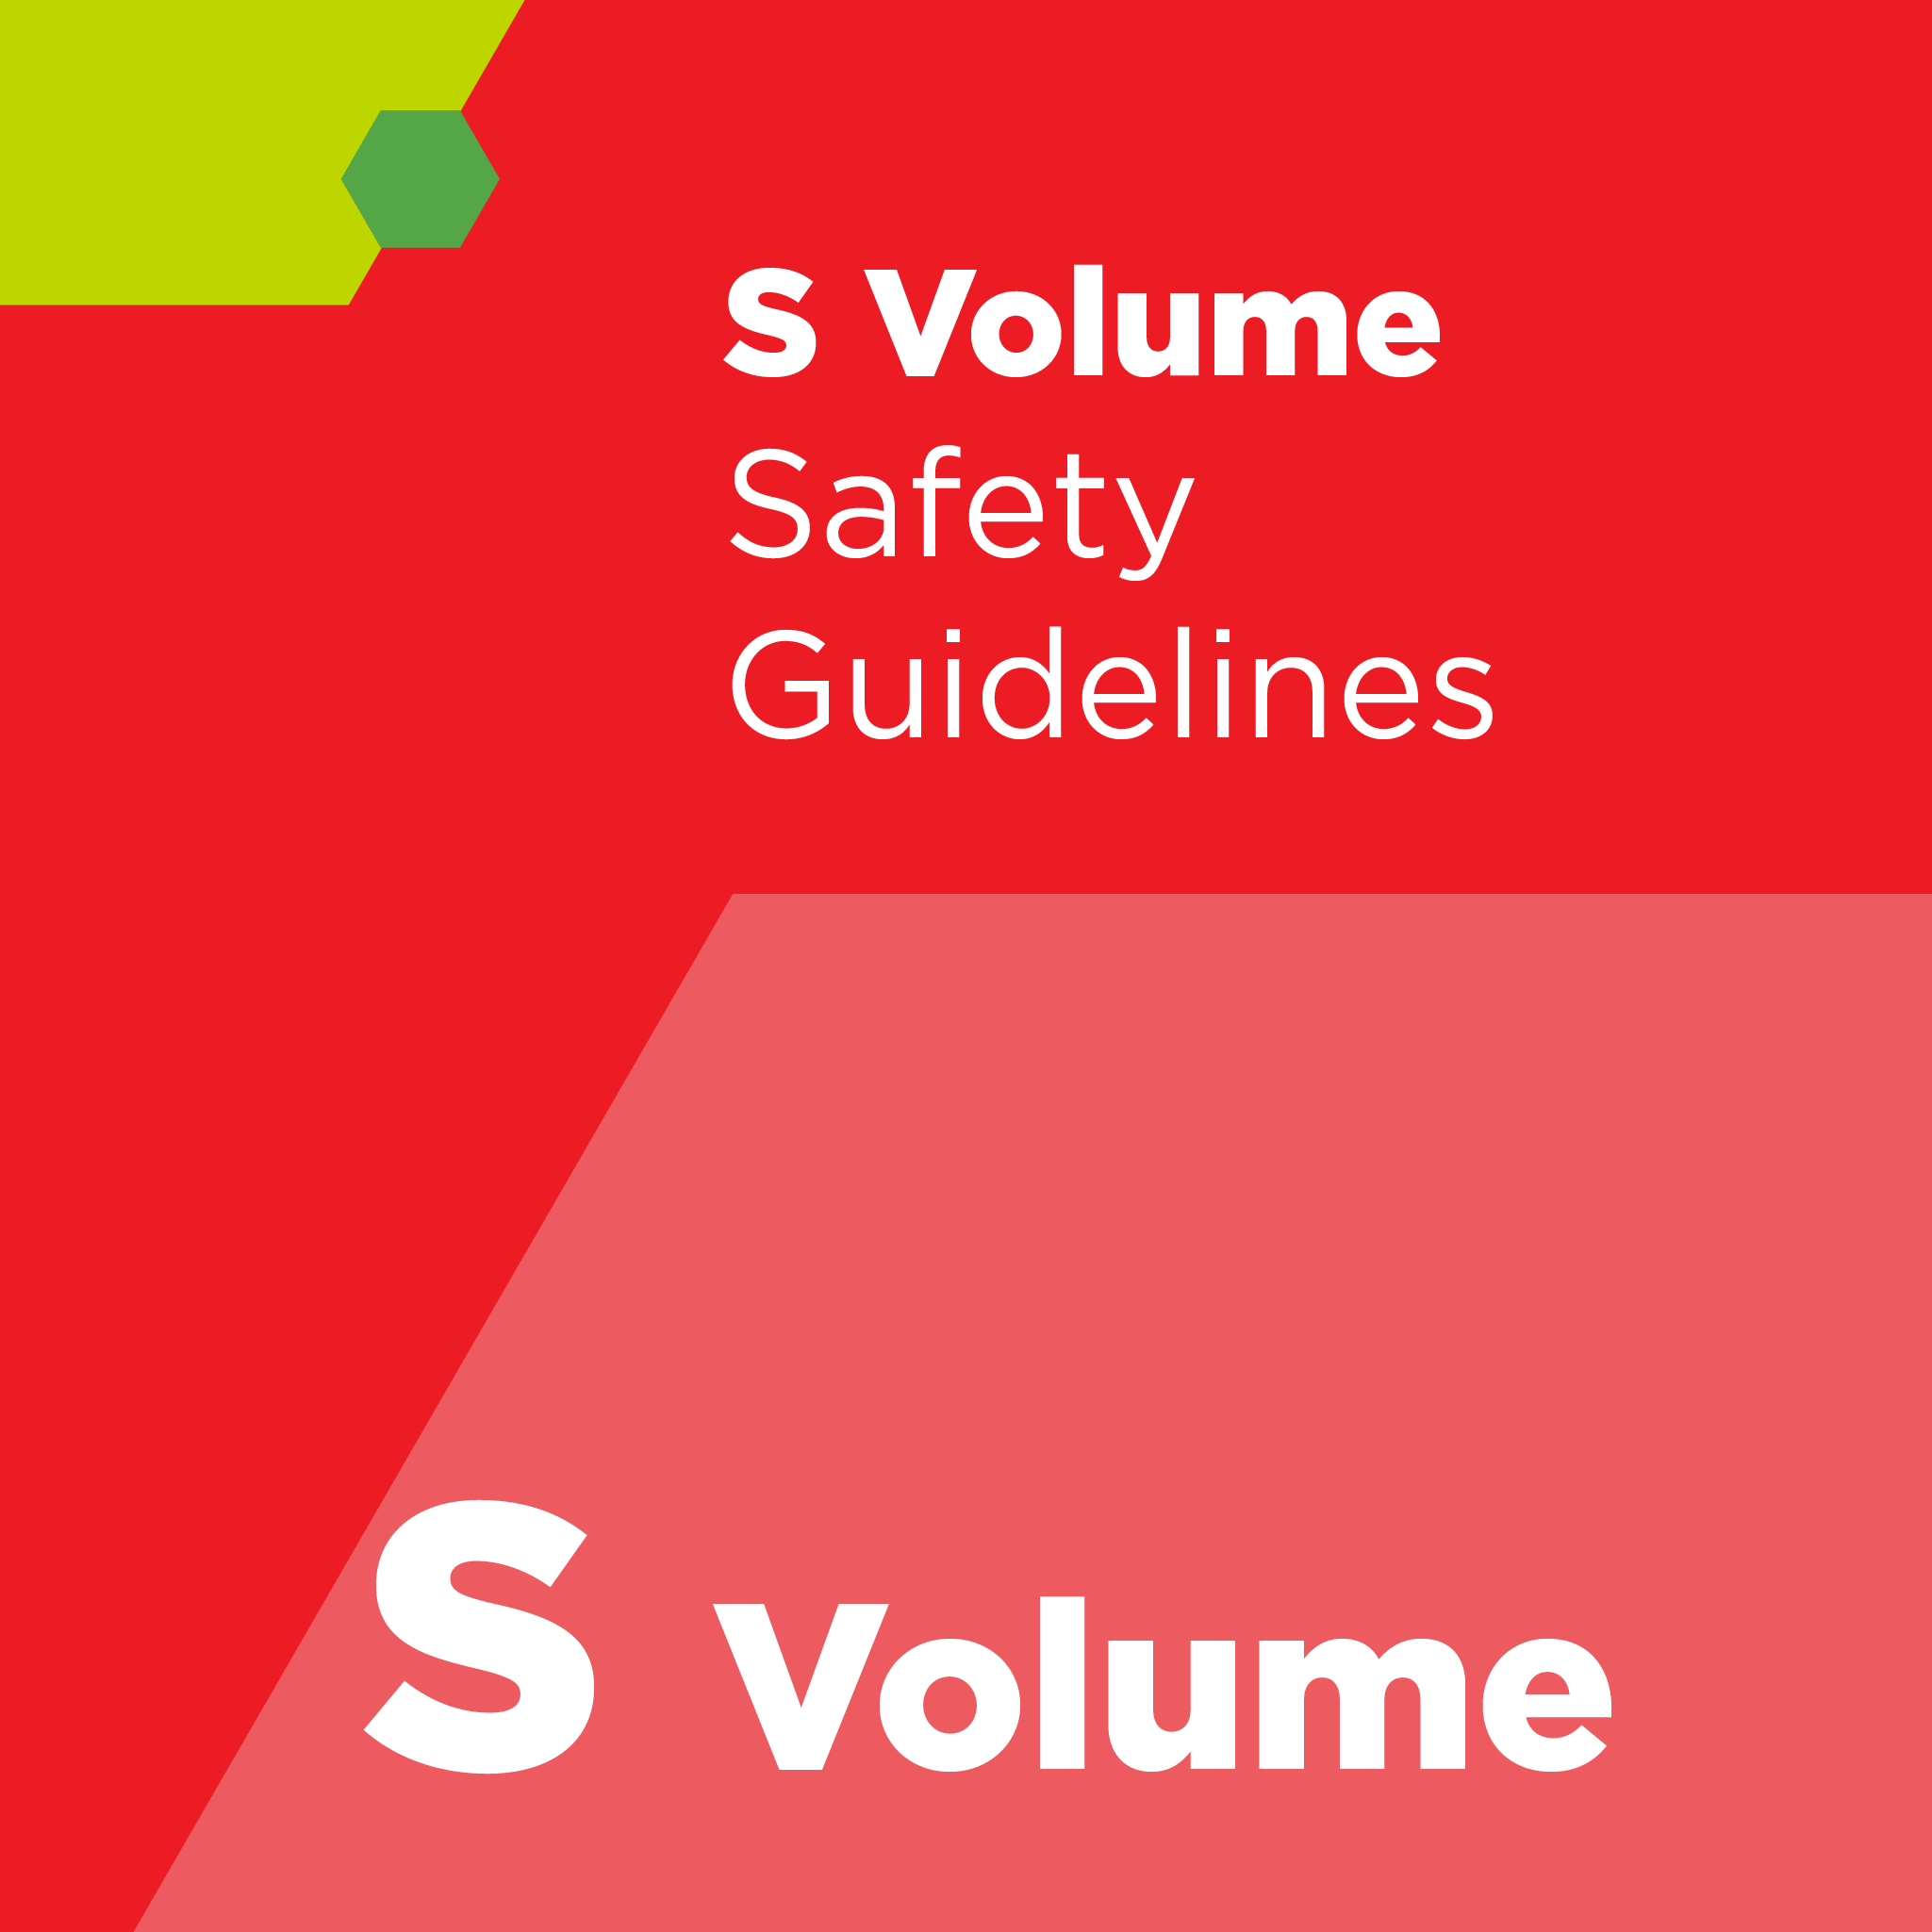 S00700 - SEMI S7 - Safety Guideline for Evaluating Personnel and Evaluating Company Qualifications